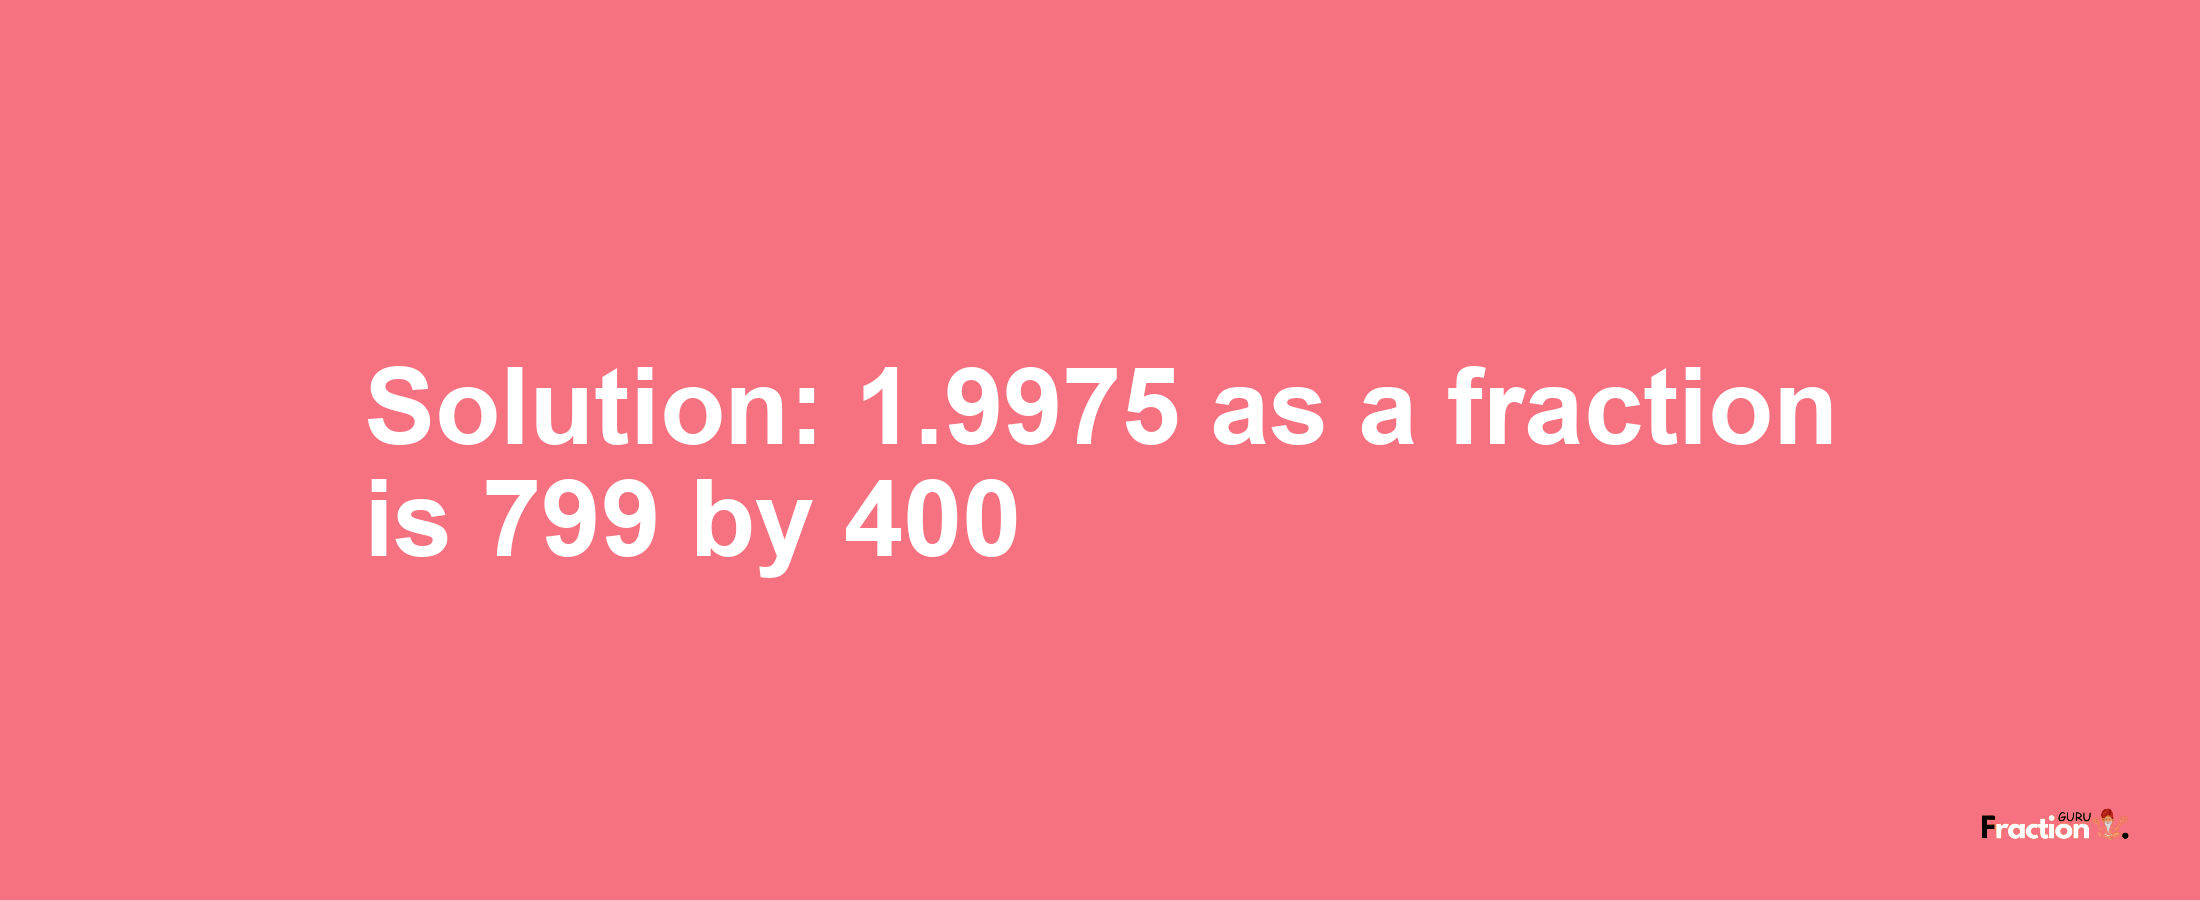 Solution:1.9975 as a fraction is 799/400